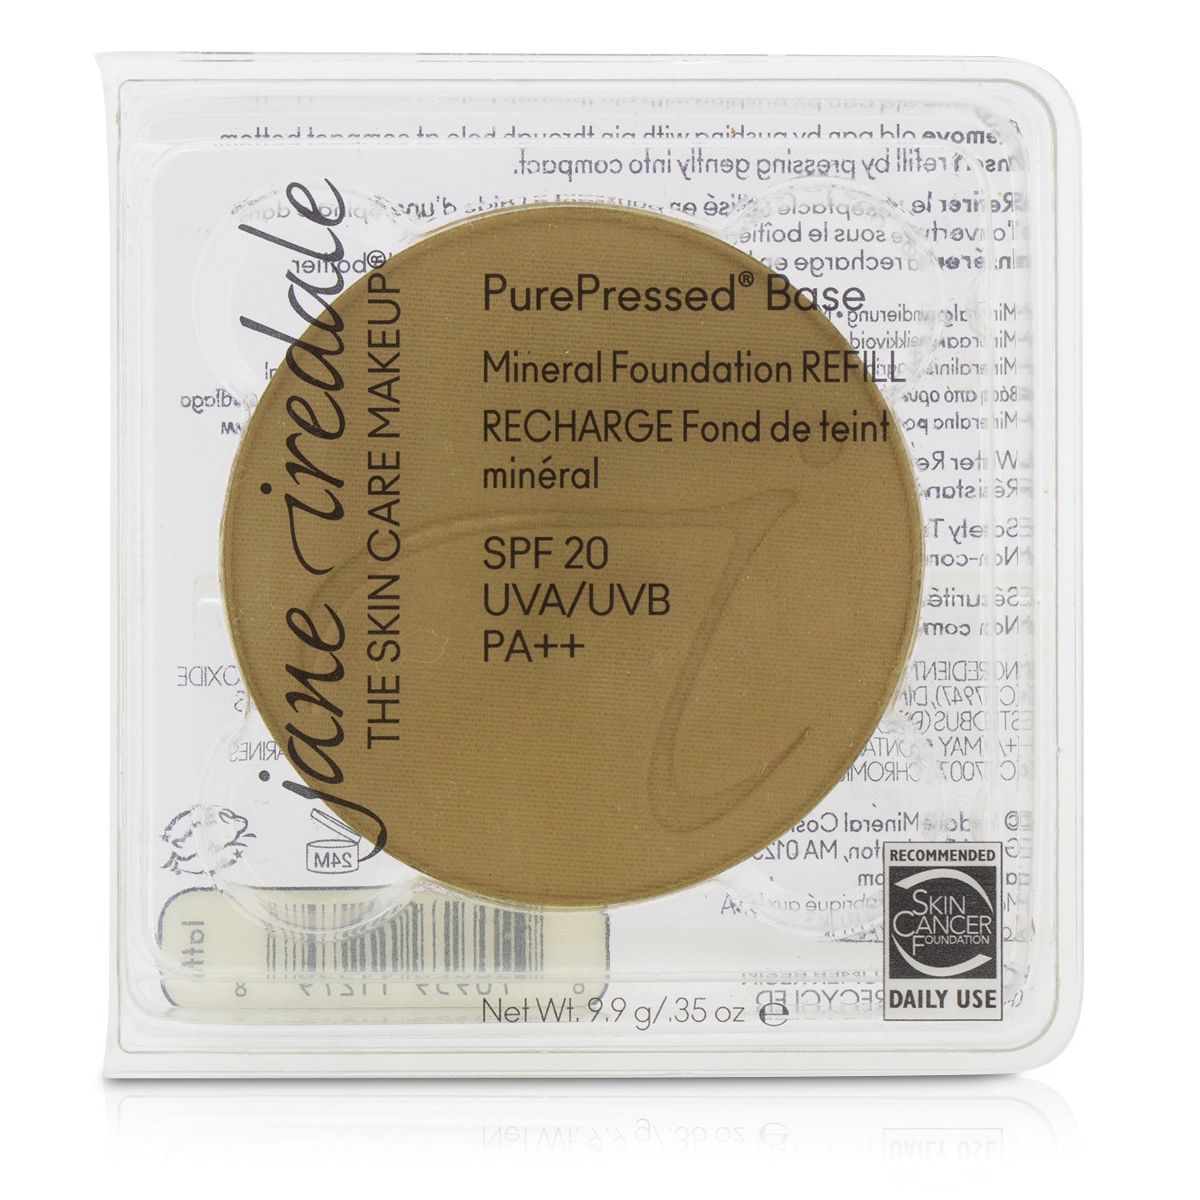 PurePressed Base Mineral Foundation Refill SPF 20 - Latte Jane Iredale Image